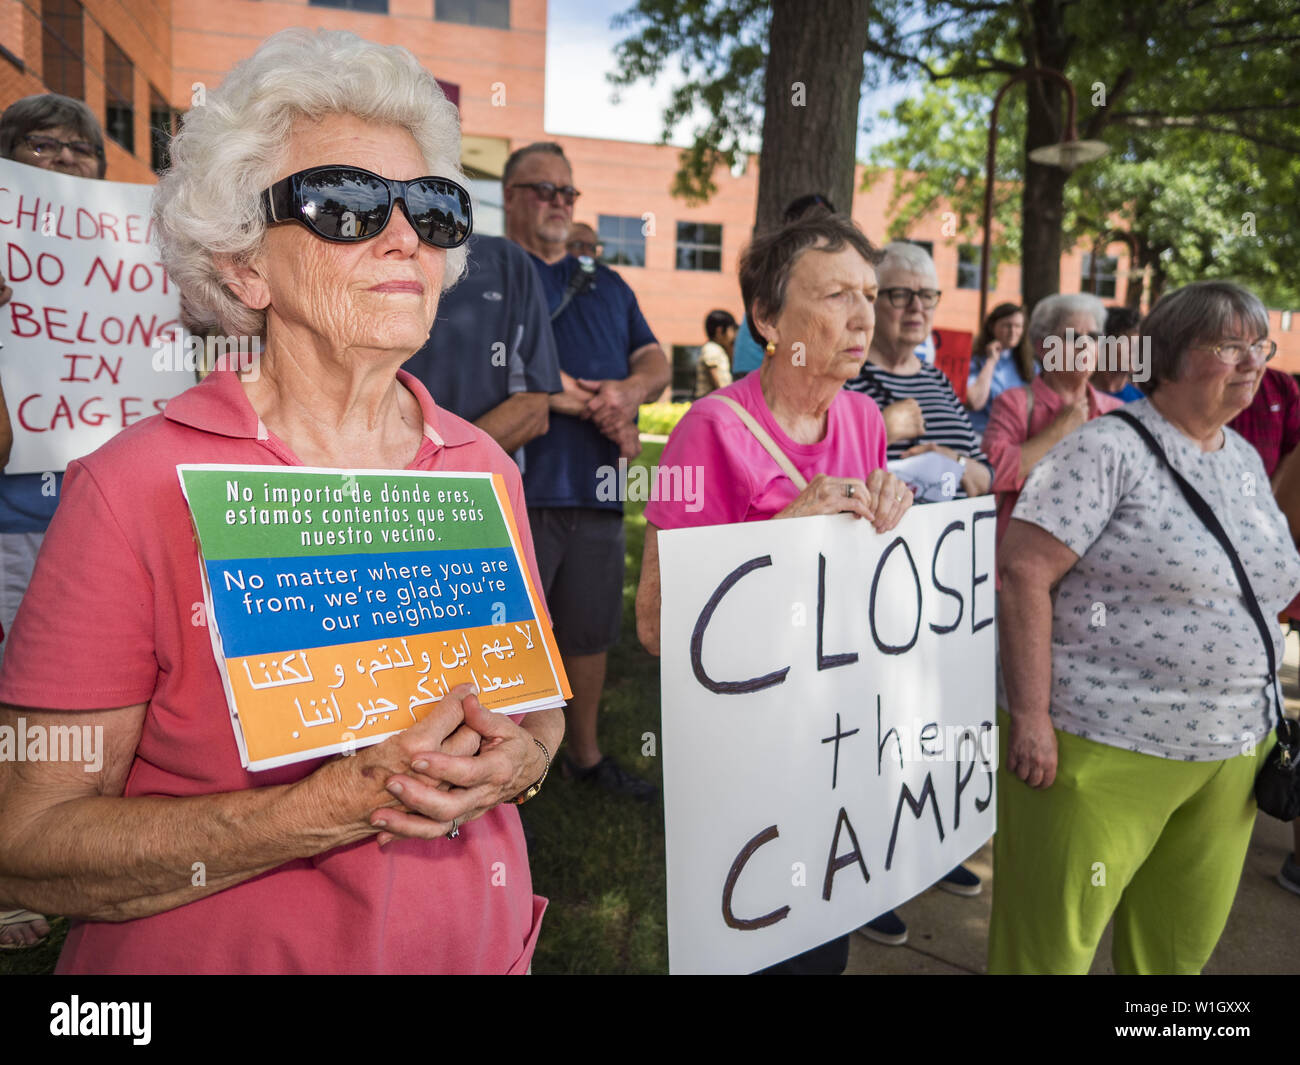 July 2, 2019 - Des Moines, Iowa, U.S - People gather outside of Rep. Cindy Axne's (D-IA) office in Des Moines. About 150 people came to Congresswoman Axne's office Tuesday to protest the treatment of migrant children detained by the US Border Patrol along the US/Mexico border. Axne was not in the office, but a member of Axne's staff took notes and promised to pass people's concerns on to the Congresswoman. Similar protests were held at other congressional offices and Immigration and Customs Enforcement (ICE) detention facilities across the country. (Credit Image: © Jack Kurtz/ZUMA Wire) Stock Photo